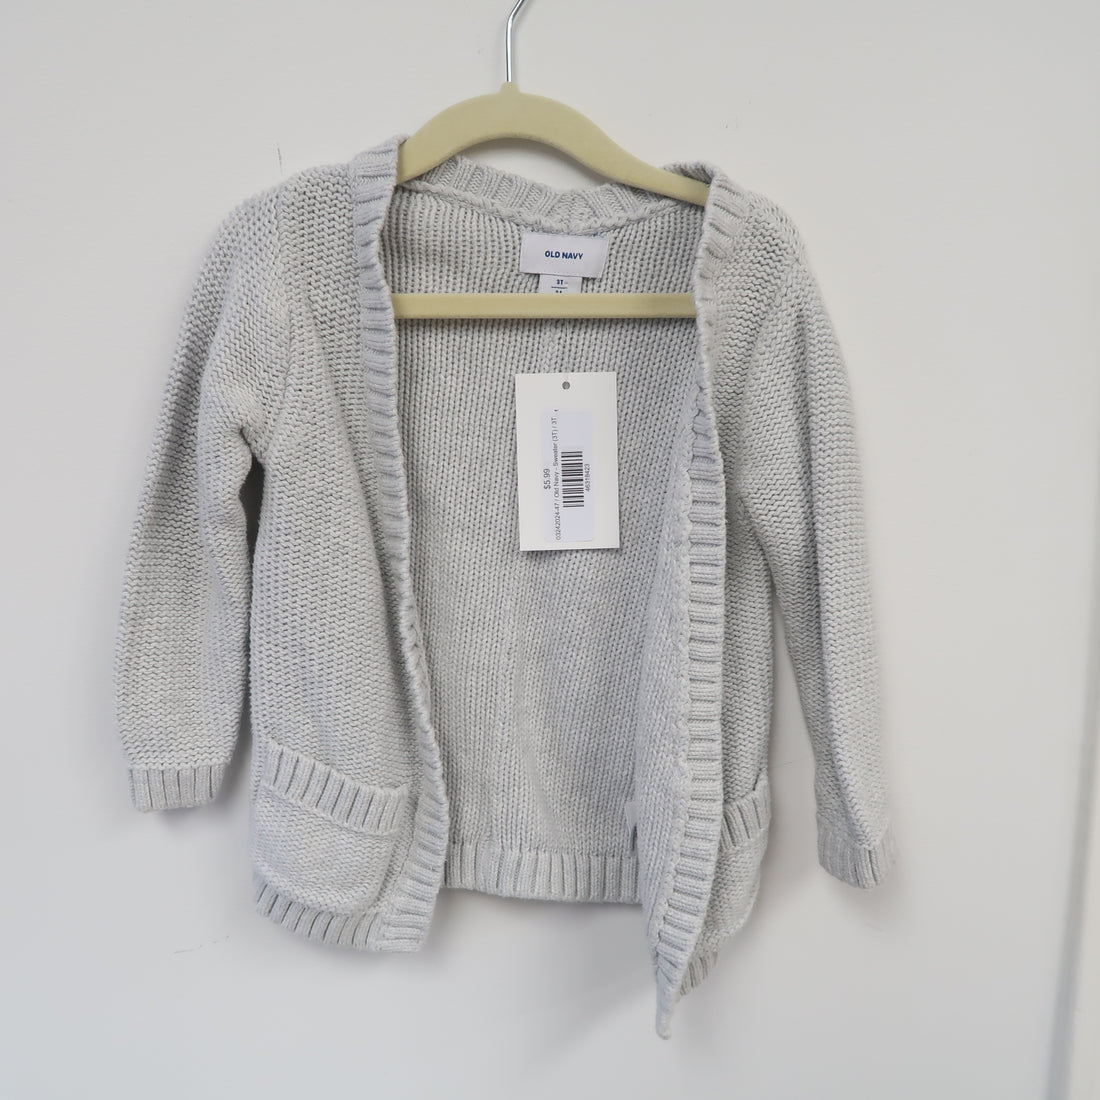 Old Navy - Sweater (3T)